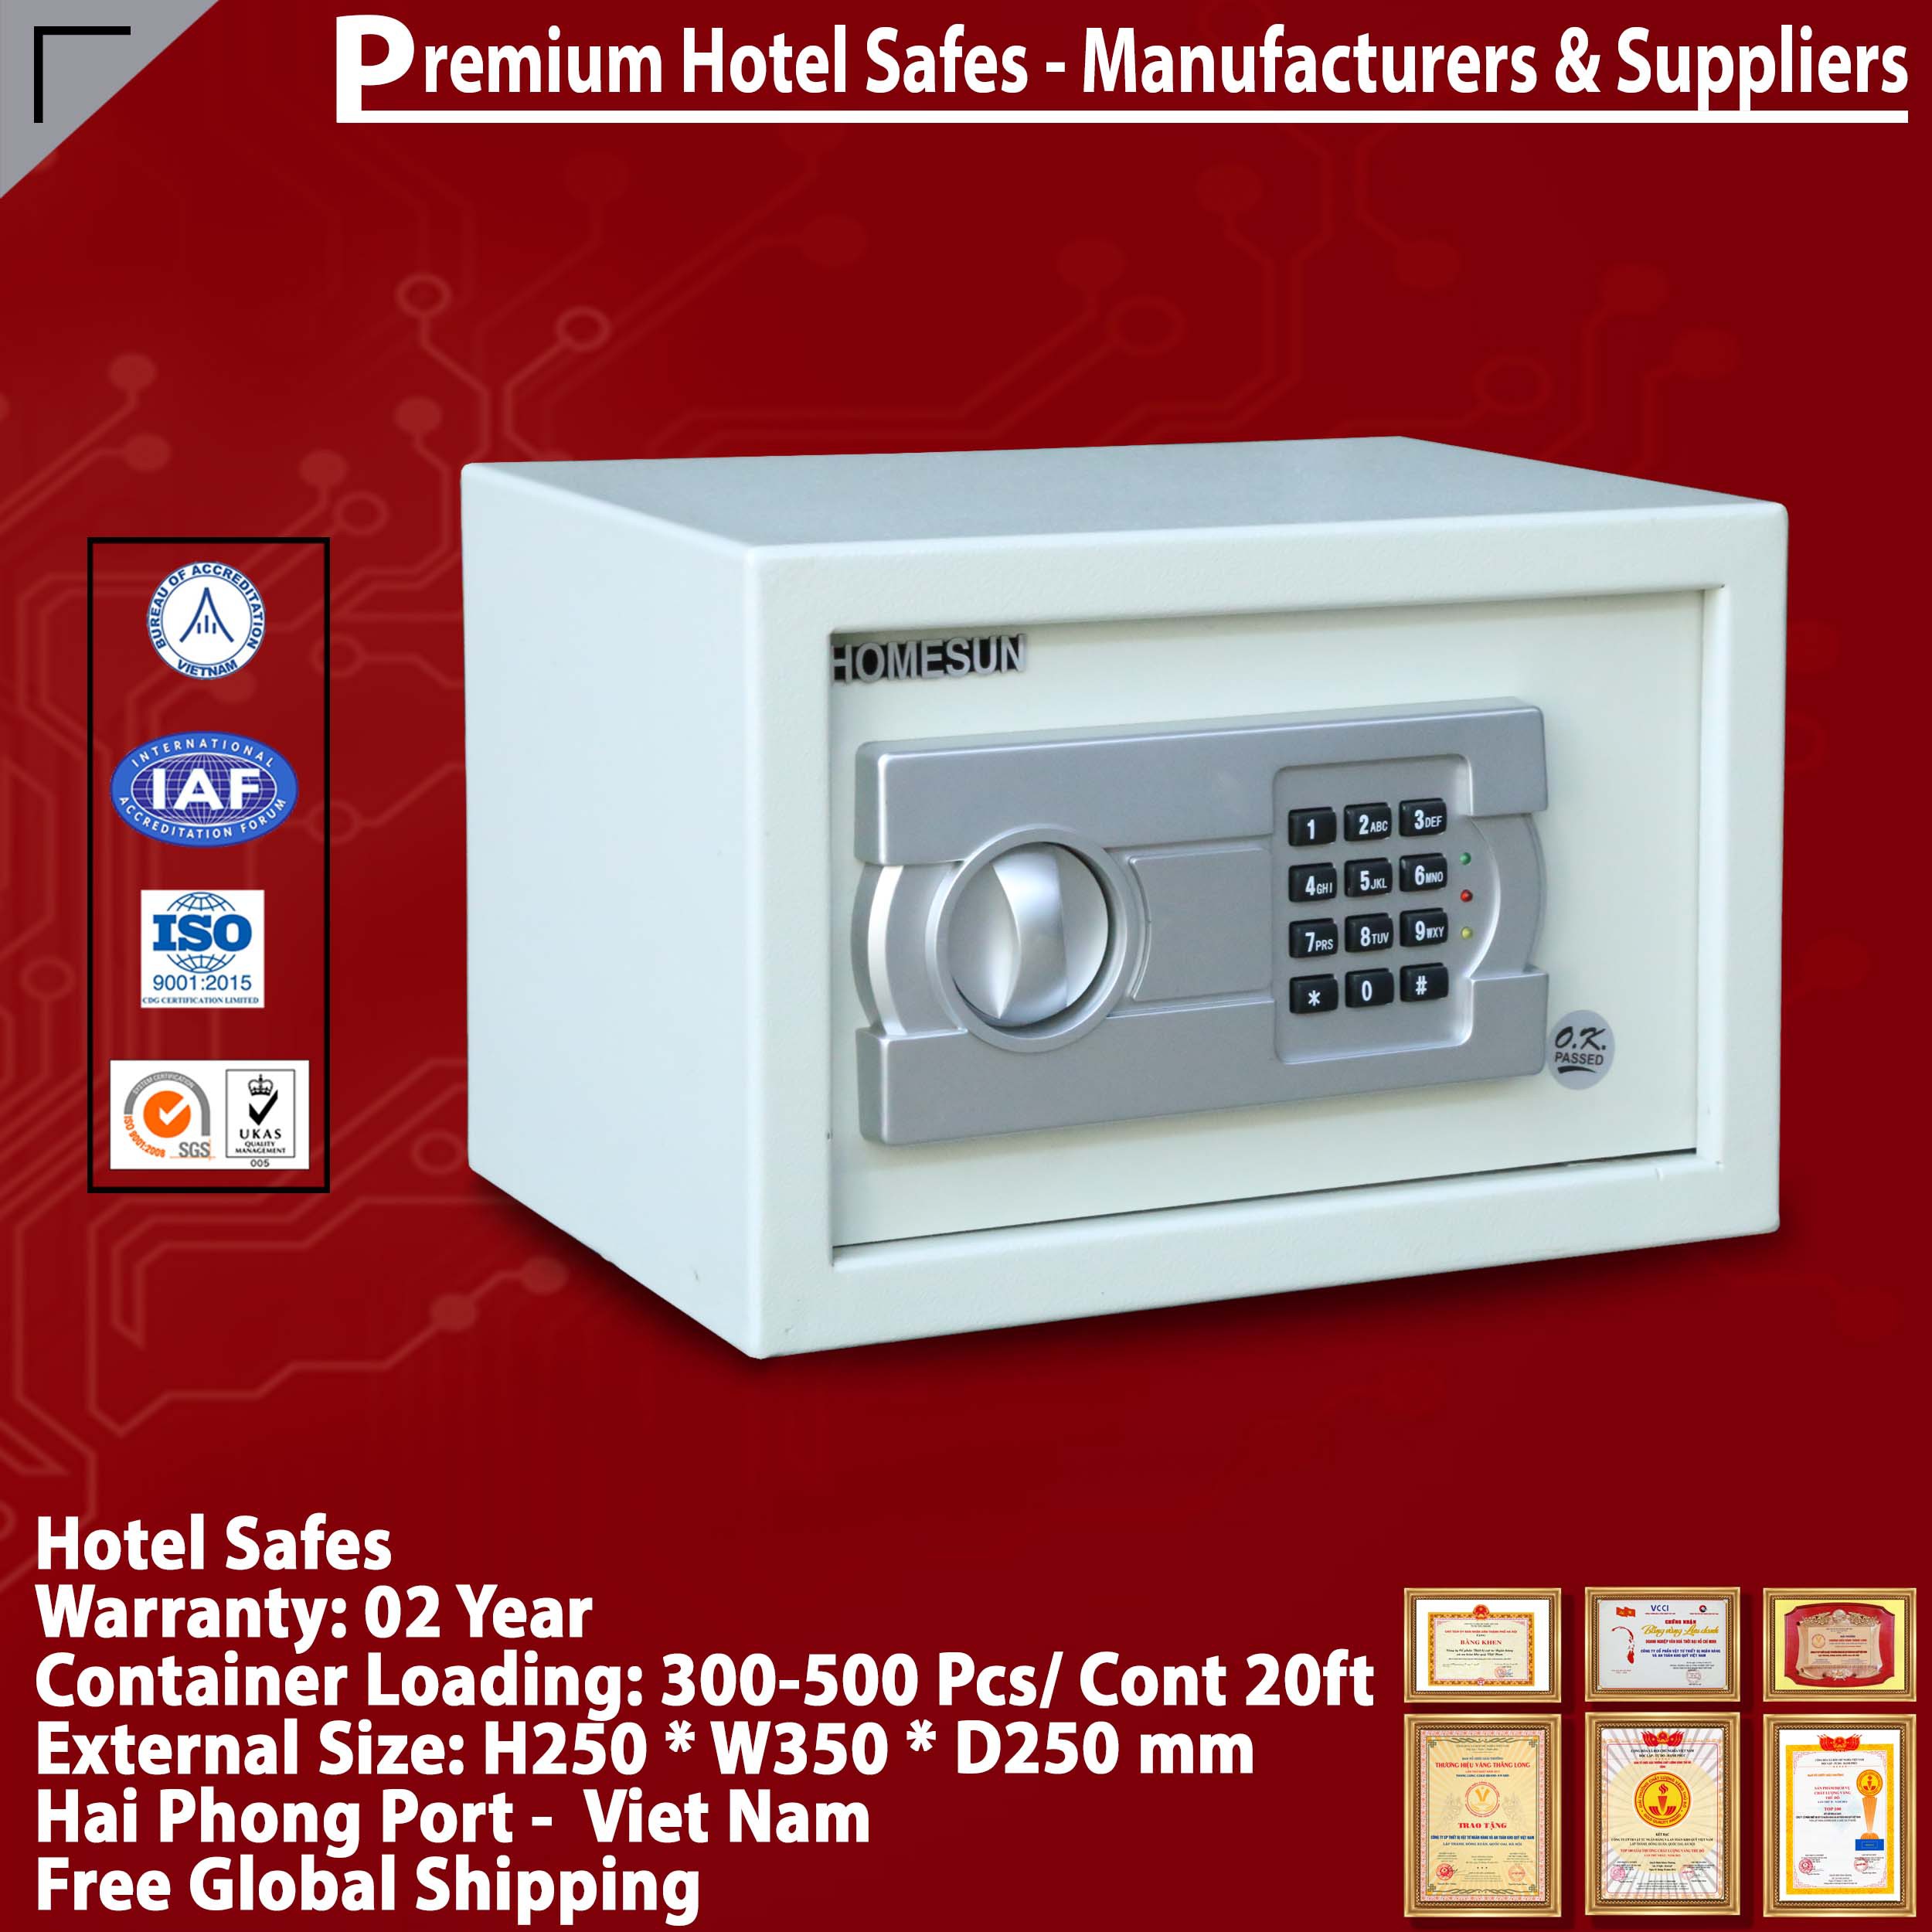 Hotel Safes Resort Manufacturing Facility